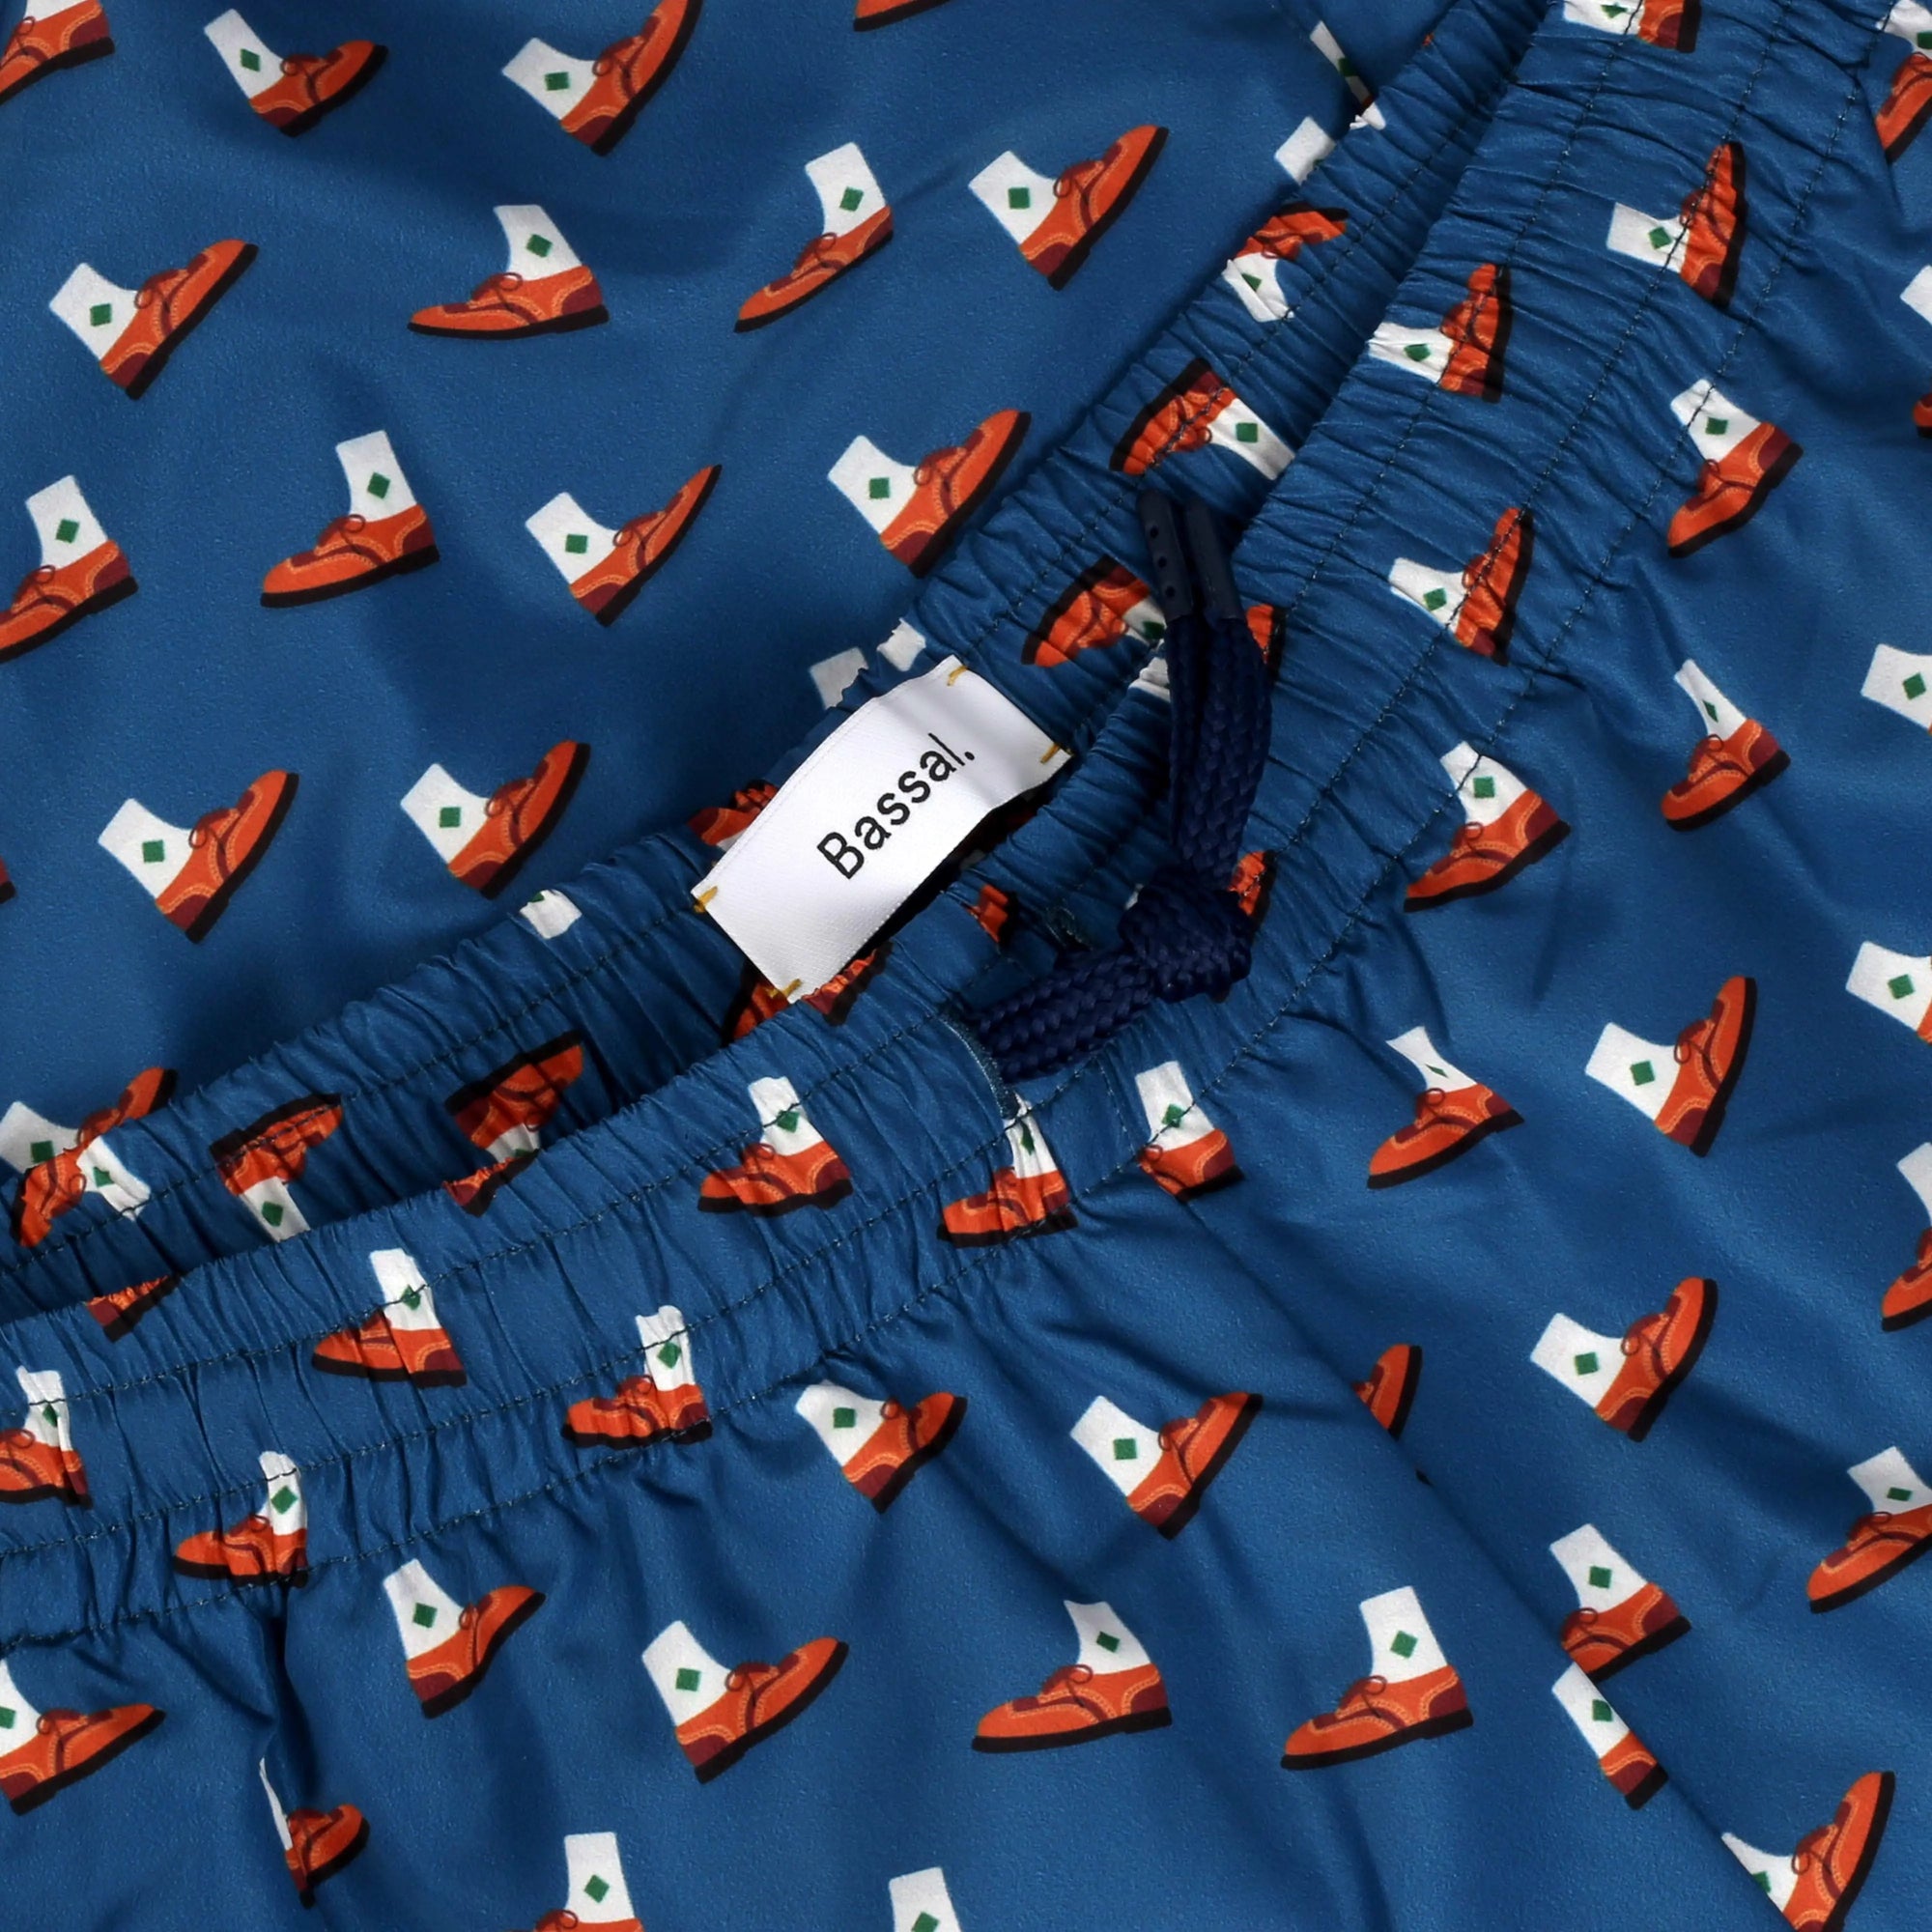 A pair of blue Derby Swimwear decorated with small boat patterns is neatly folded inside a white gift box. A clothing tag with the brand name "Bassal" hangs from the waistband. The box lid, placed to the side, also displays "Bassal." Discover more at bassalstore in Barcelona.